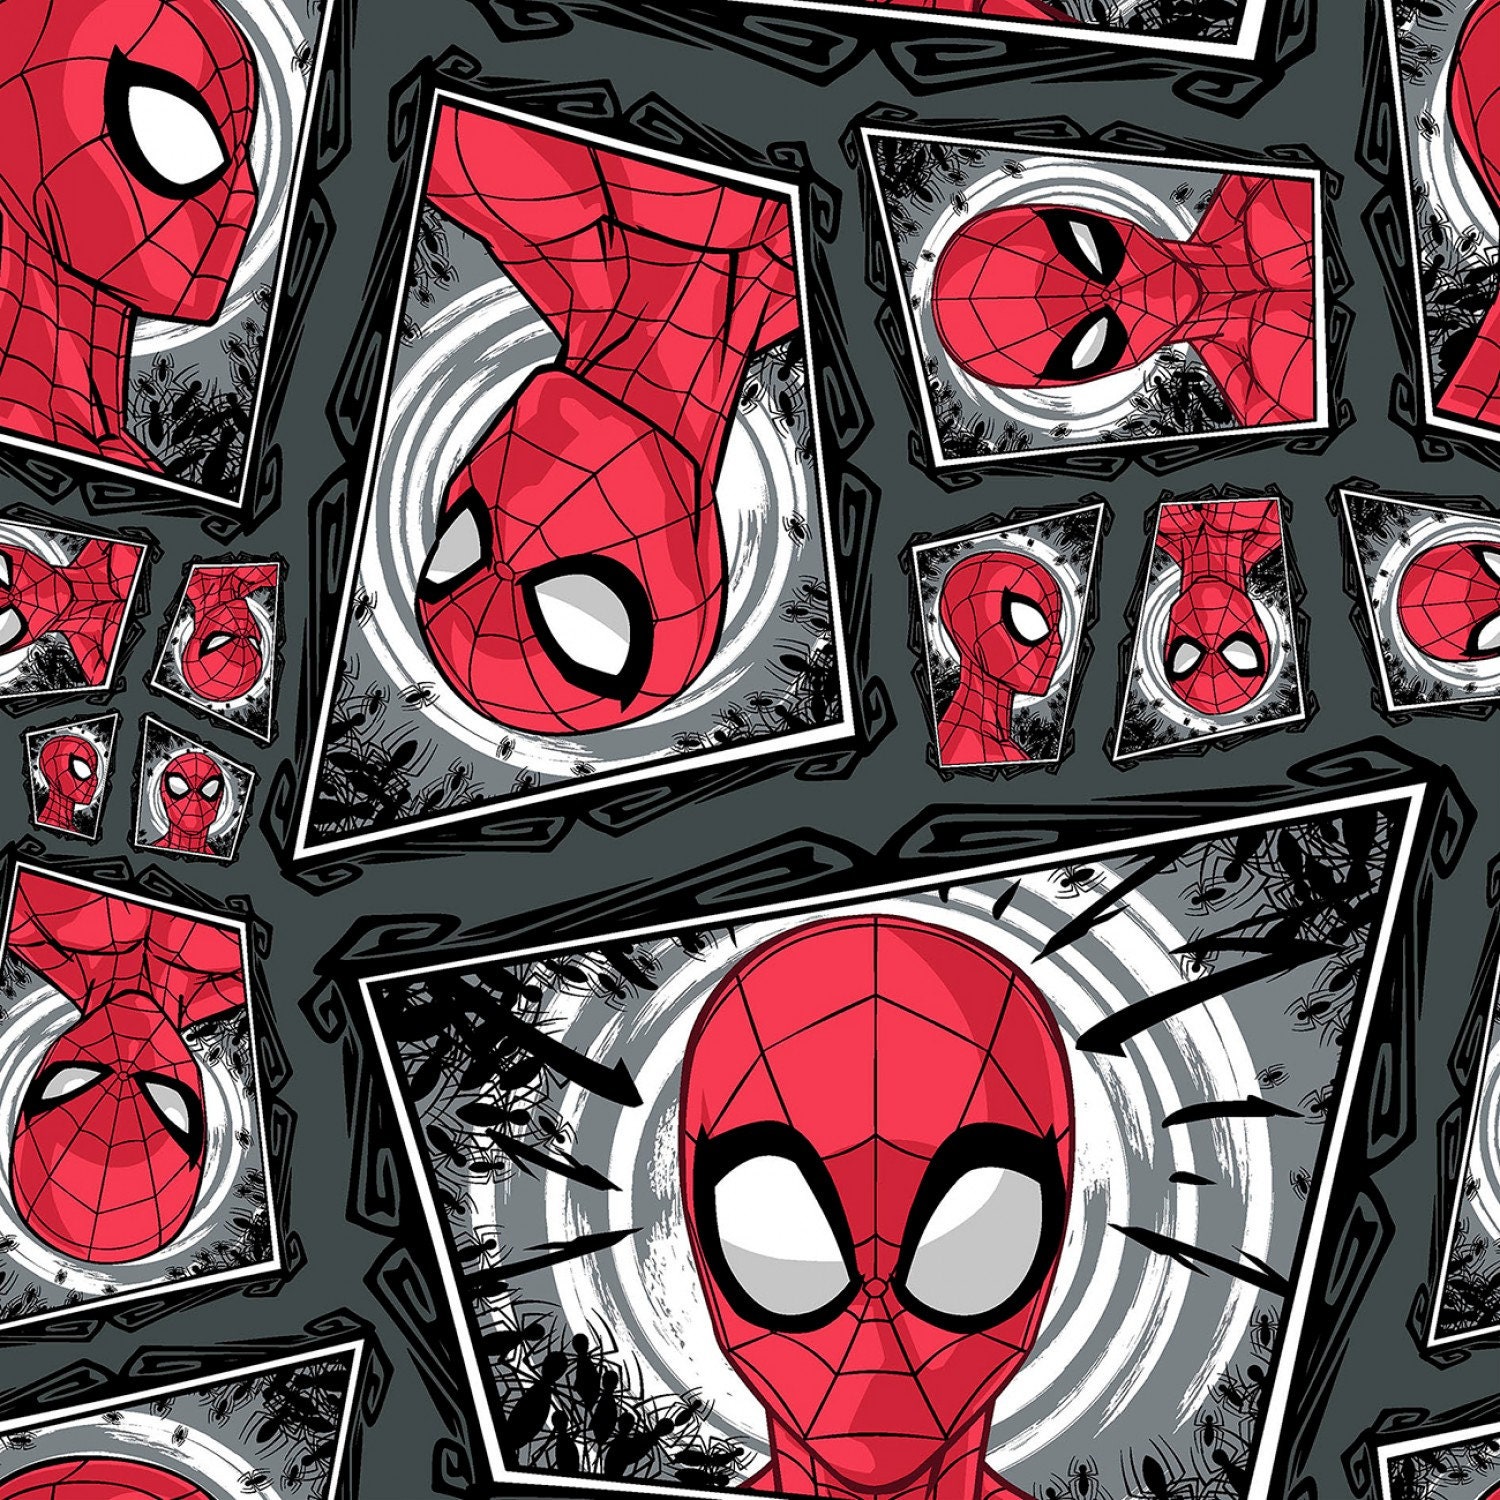 Cotton fabric decorated on Spiderman's theme